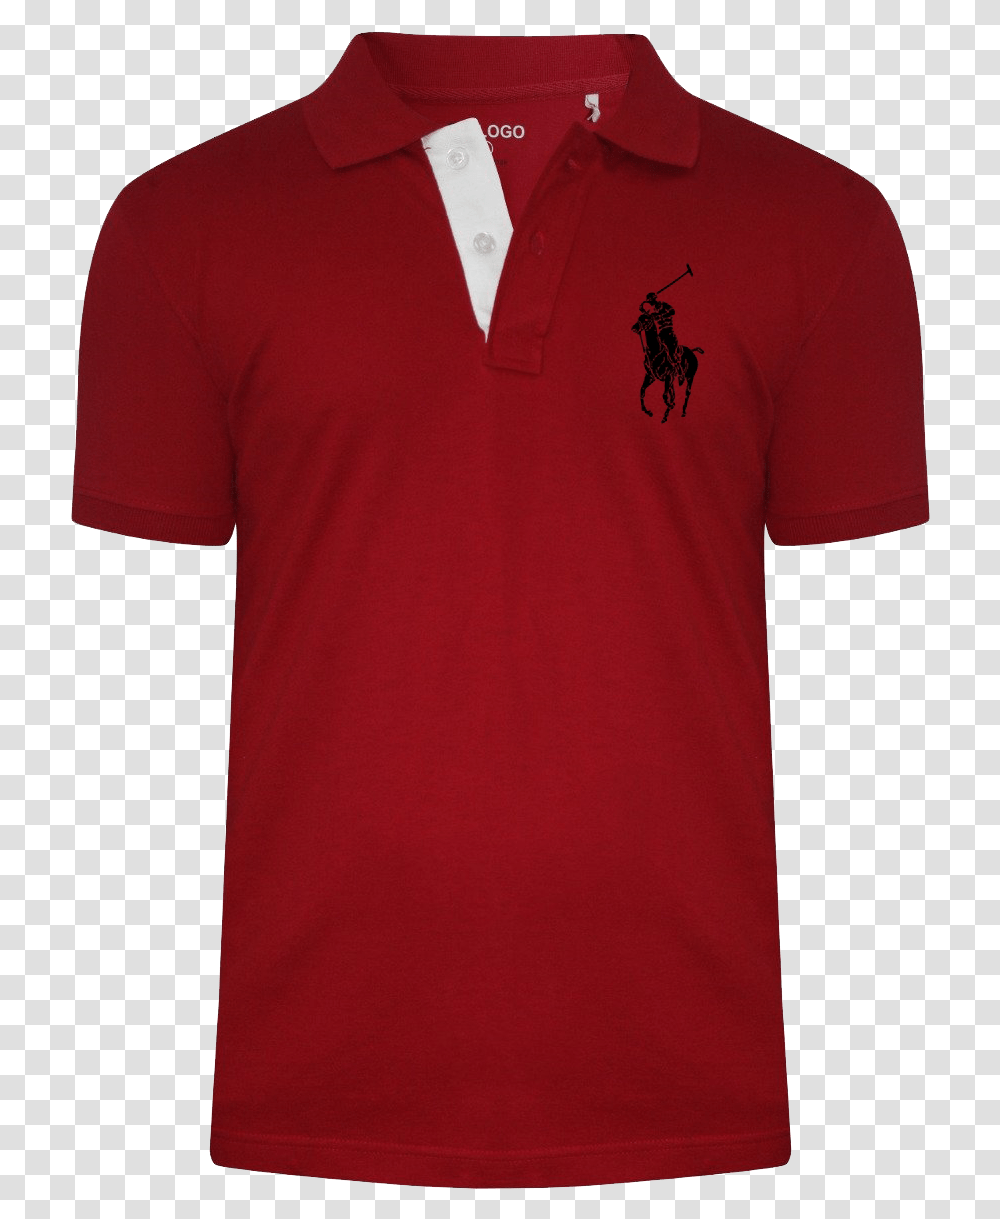 Polo T Shirts Background Adidas T Shirt Damen Rot, Apparel, Sleeve, Jersey Transparent Png